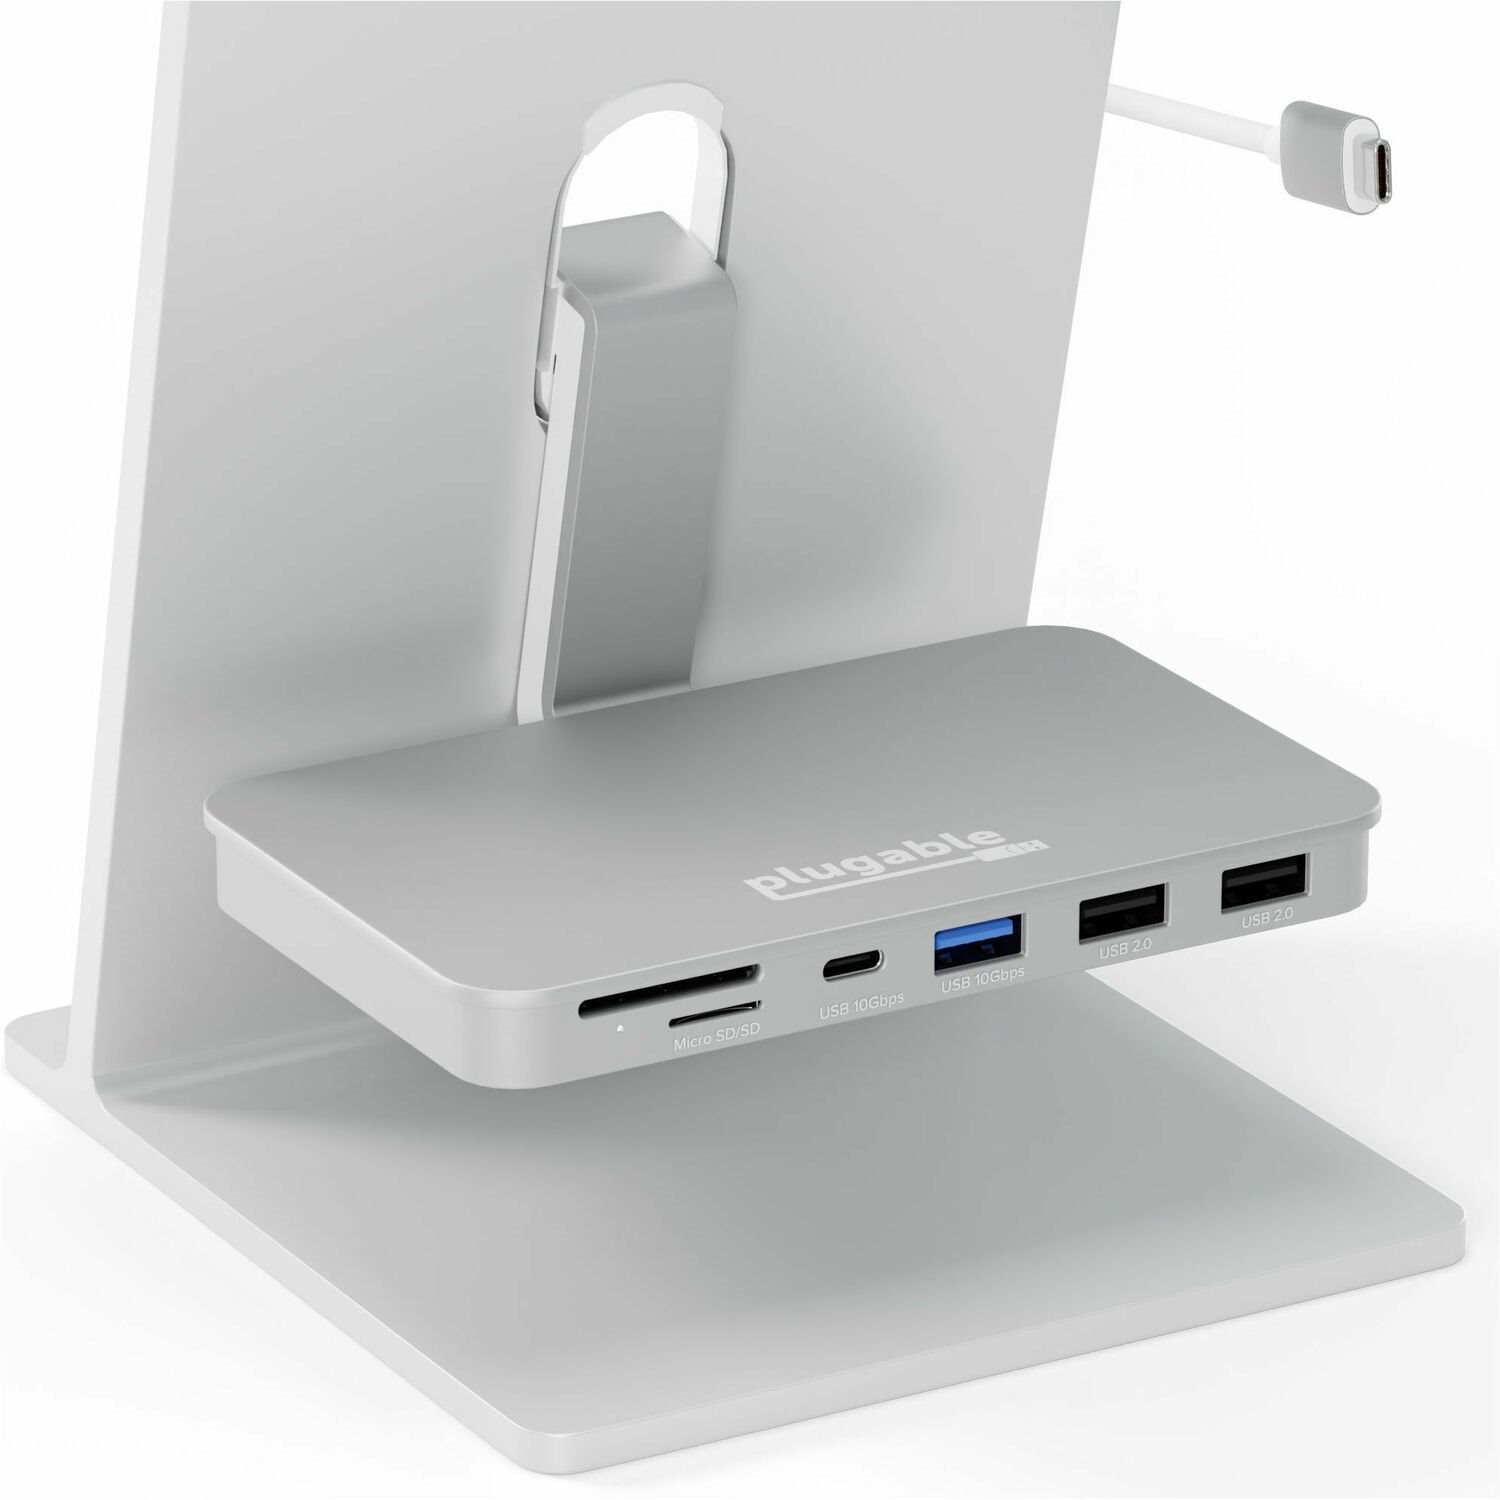 Plugable USB C Hub for iMac 24 Inch, 6-in-1 iMac USB Hub Multiport Adapter with 10Gbps